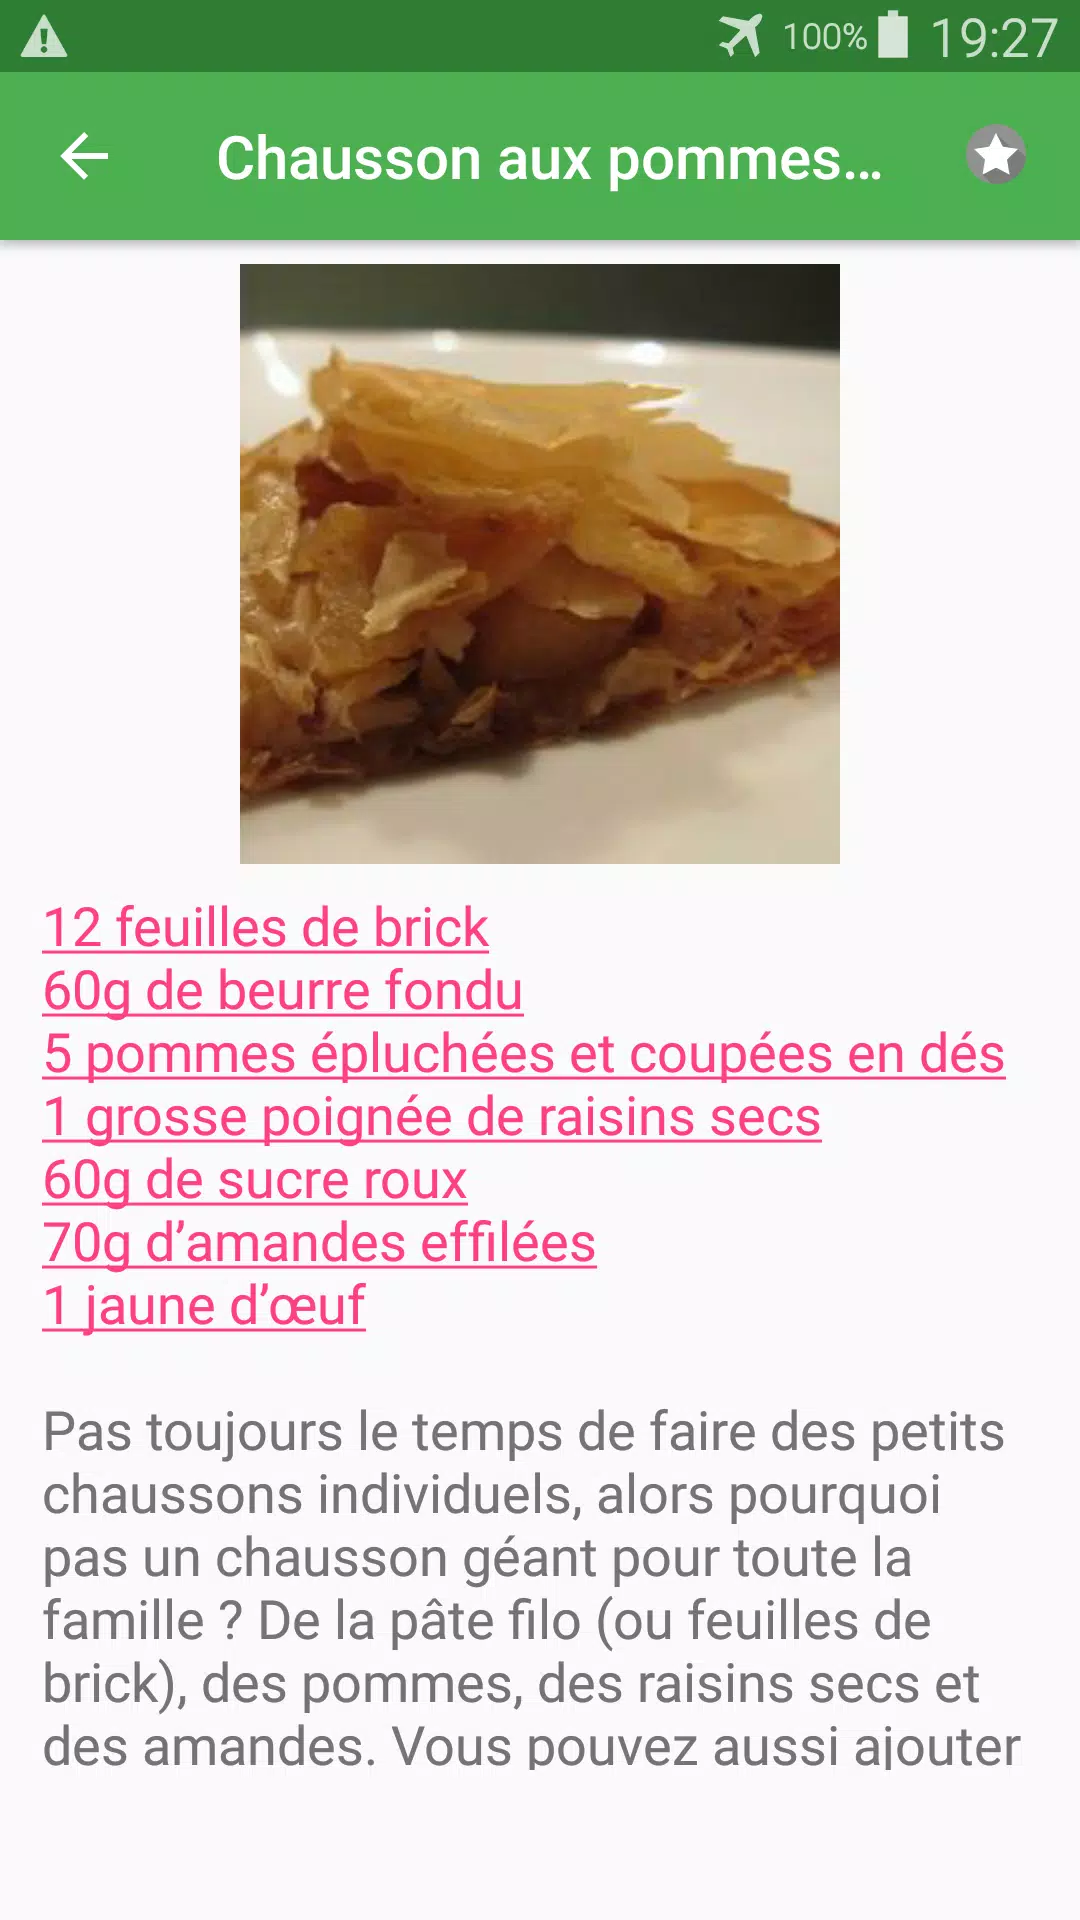 Chausson aux pommes for Android - APK Download